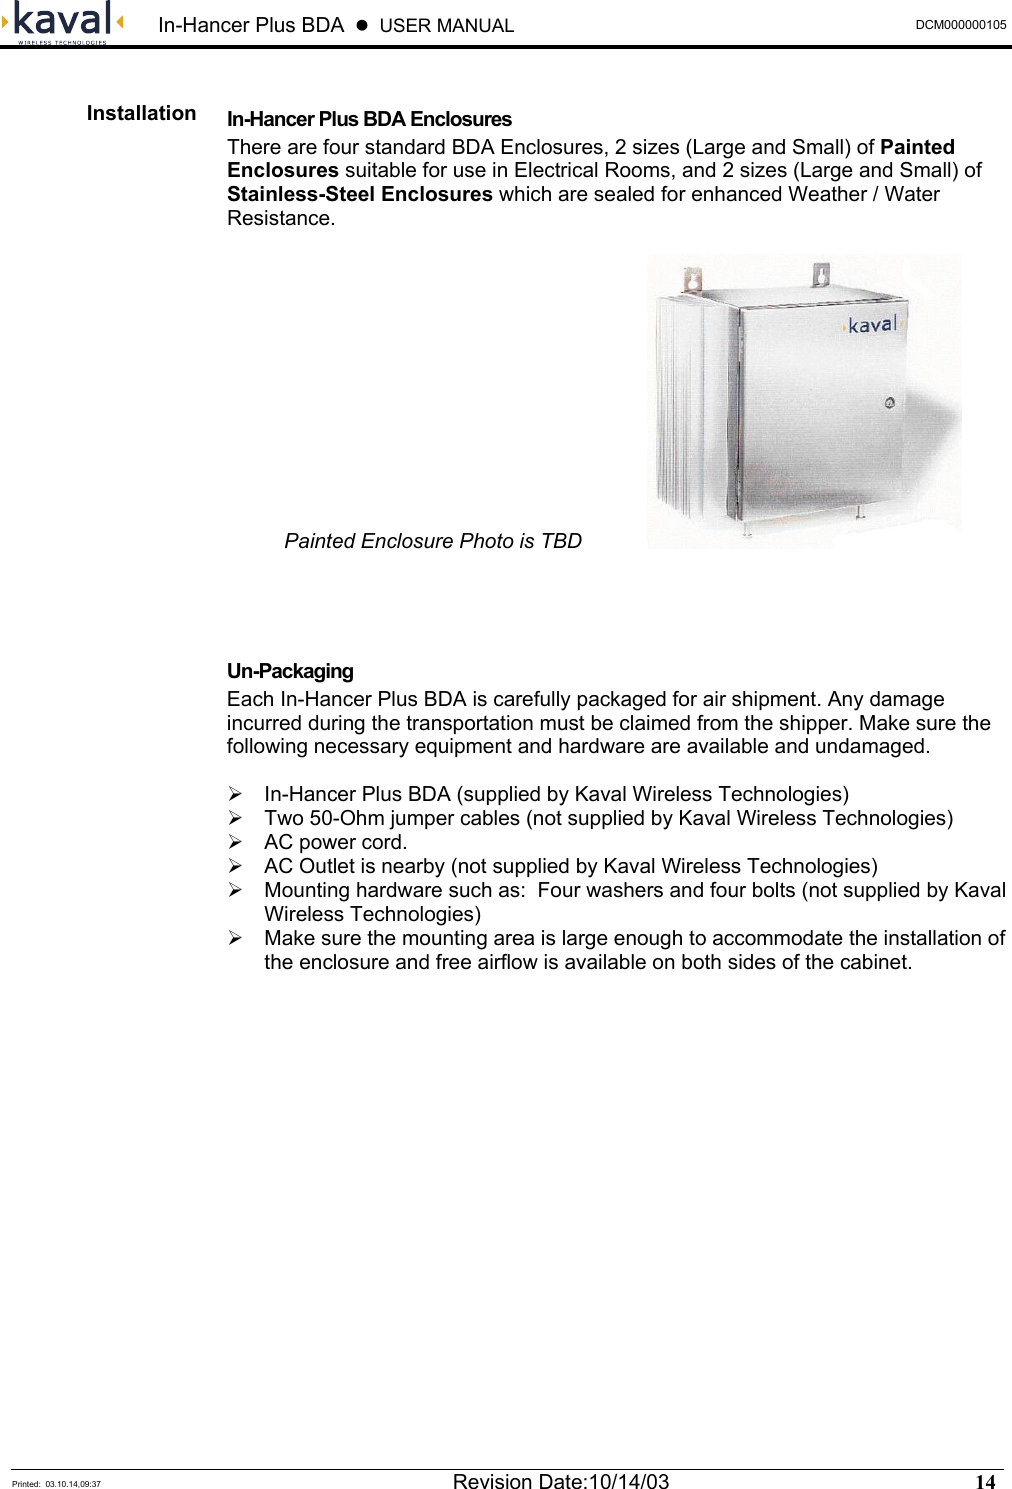  In-Hancer Plus BDA    USER MANUAL  DCM000000105  Installation  In-Hancer Plus BDA Enclosures There are four standard BDA Enclosures, 2 sizes (Large and Small) of Painted Enclosures suitable for use in Electrical Rooms, and 2 sizes (Large and Small) of Stainless-Steel Enclosures which are sealed for enhanced Weather / Water Resistance.    Painted Enclosure Photo is TBD      Un-Packaging Each In-Hancer Plus BDA is carefully packaged for air shipment. Any damage incurred during the transportation must be claimed from the shipper. Make sure the following necessary equipment and hardware are available and undamaged.   In-Hancer Plus BDA (supplied by Kaval Wireless Technologies)  Two 50-Ohm jumper cables (not supplied by Kaval Wireless Technologies)  AC power cord.  AC Outlet is nearby (not supplied by Kaval Wireless Technologies)  Mounting hardware such as:  Four washers and four bolts (not supplied by Kaval Wireless Technologies)  Make sure the mounting area is large enough to accommodate the installation of the enclosure and free airflow is available on both sides of the cabinet.   Printed:  03.10.14,09:37  Revision Date:10/14/03   14   